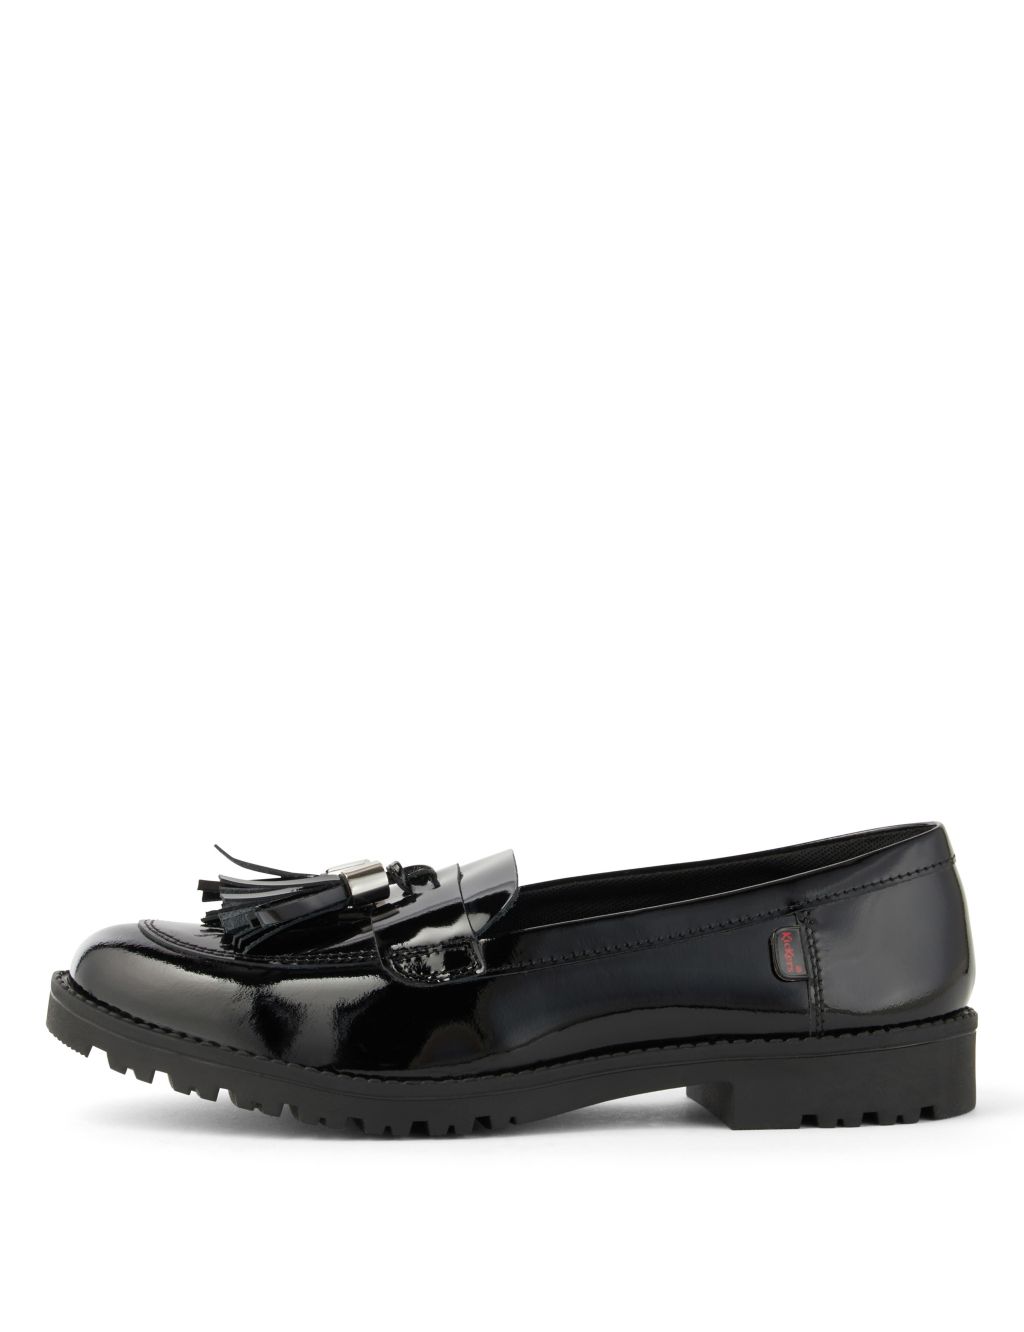 Leather Patent Tassel Loafers image 1